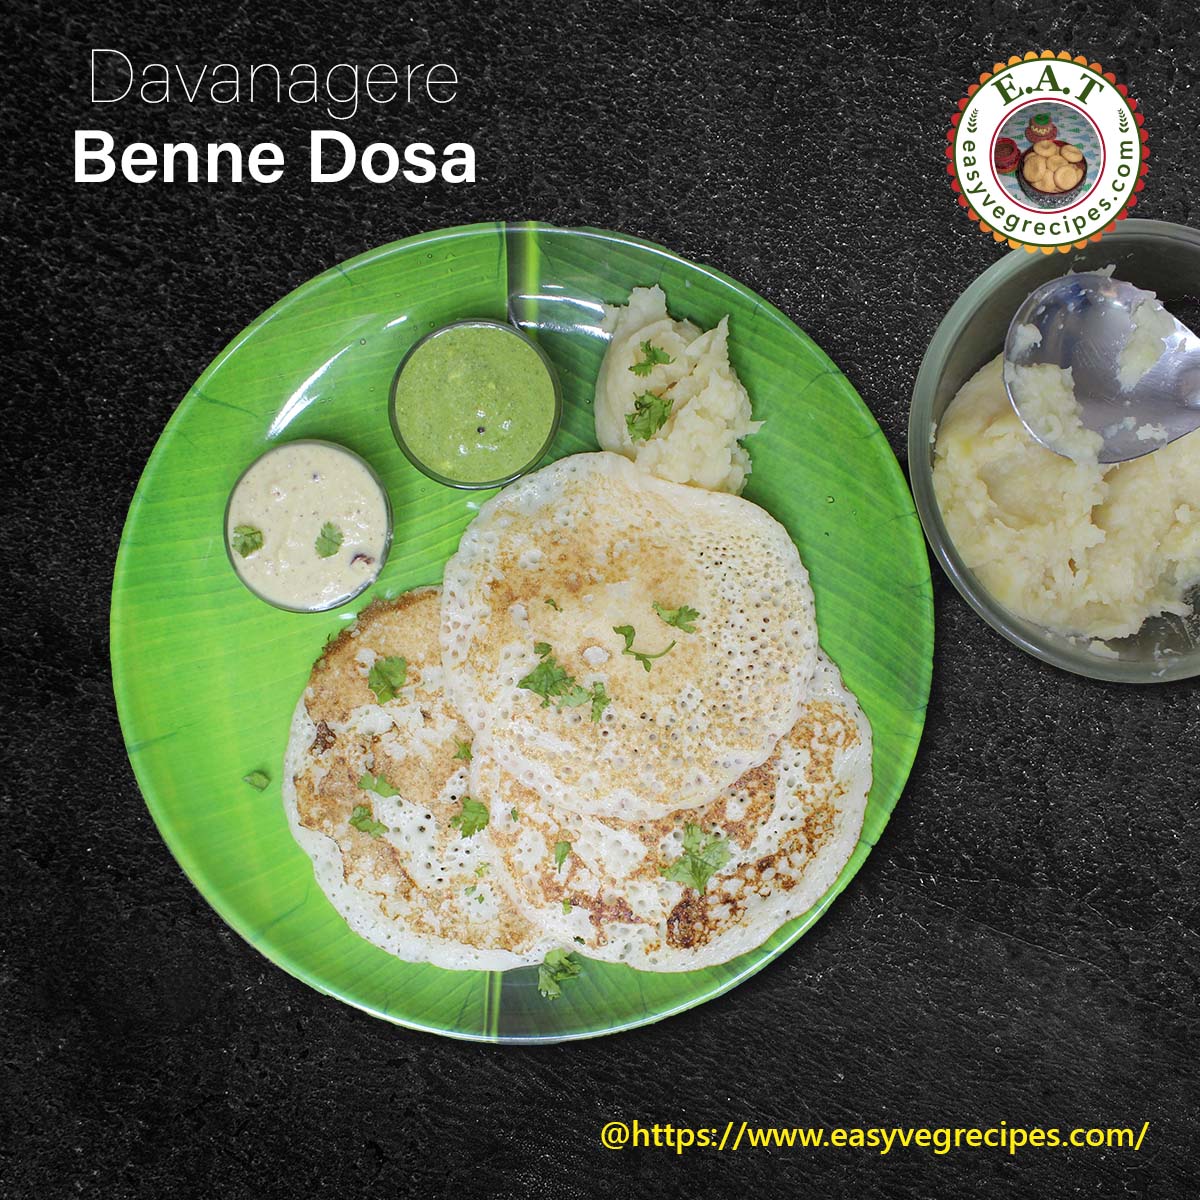 Davanagere Benne Dosa Recipe | How To Make Davanagere Benne Dosa | (davanagere Venna Dosa)